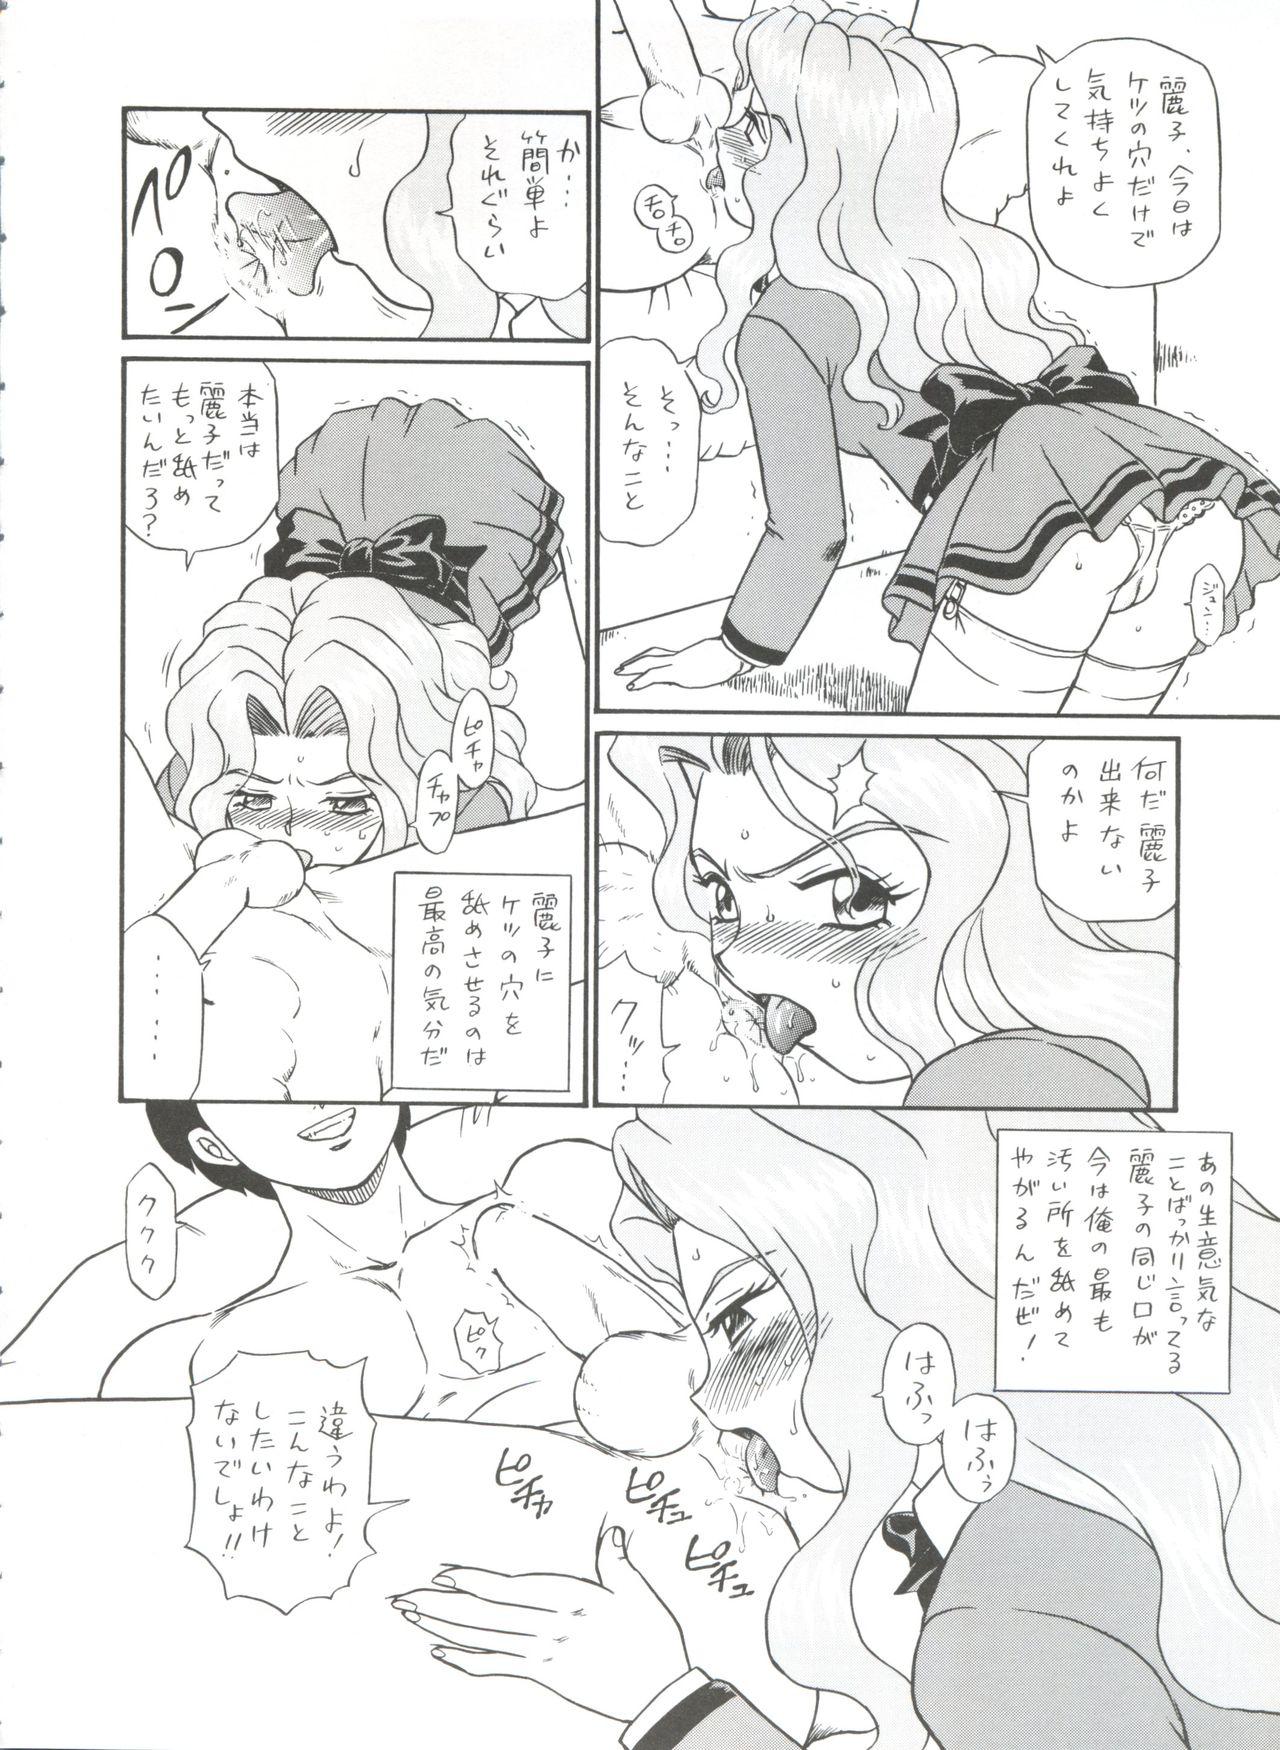 Pay Shippoppo Club House - Ghost sweeper mikami Kakyuusei Aim for the ace Jaja uma grooming up Tugging - Page 6